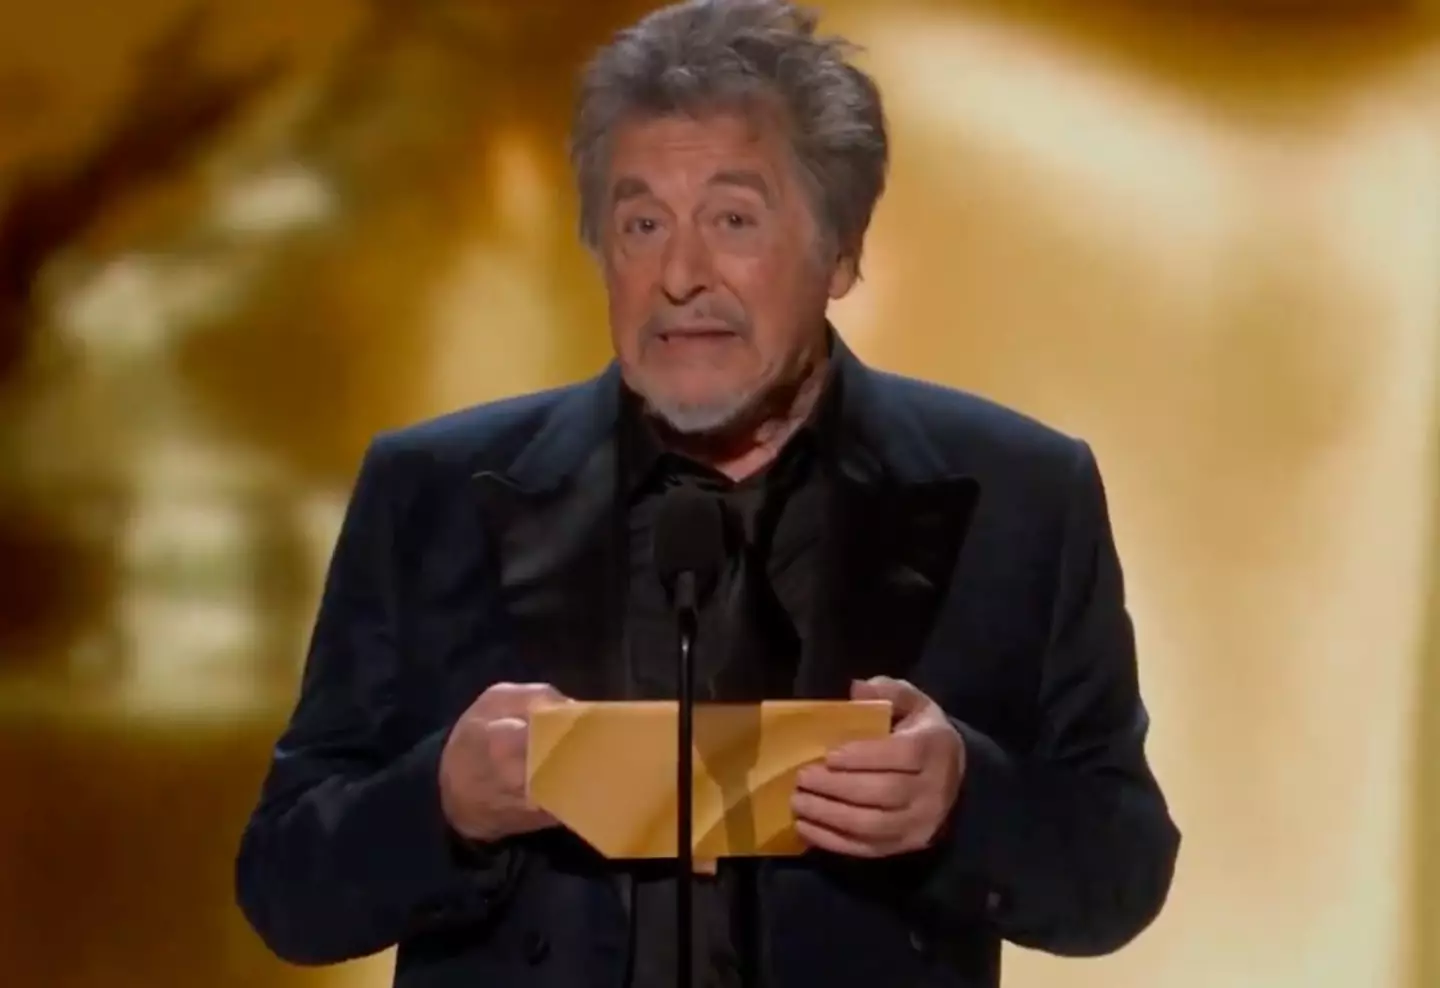 While announcing the award it seemed Al Pacino was more concerned about not naming the wrong film as the winner.